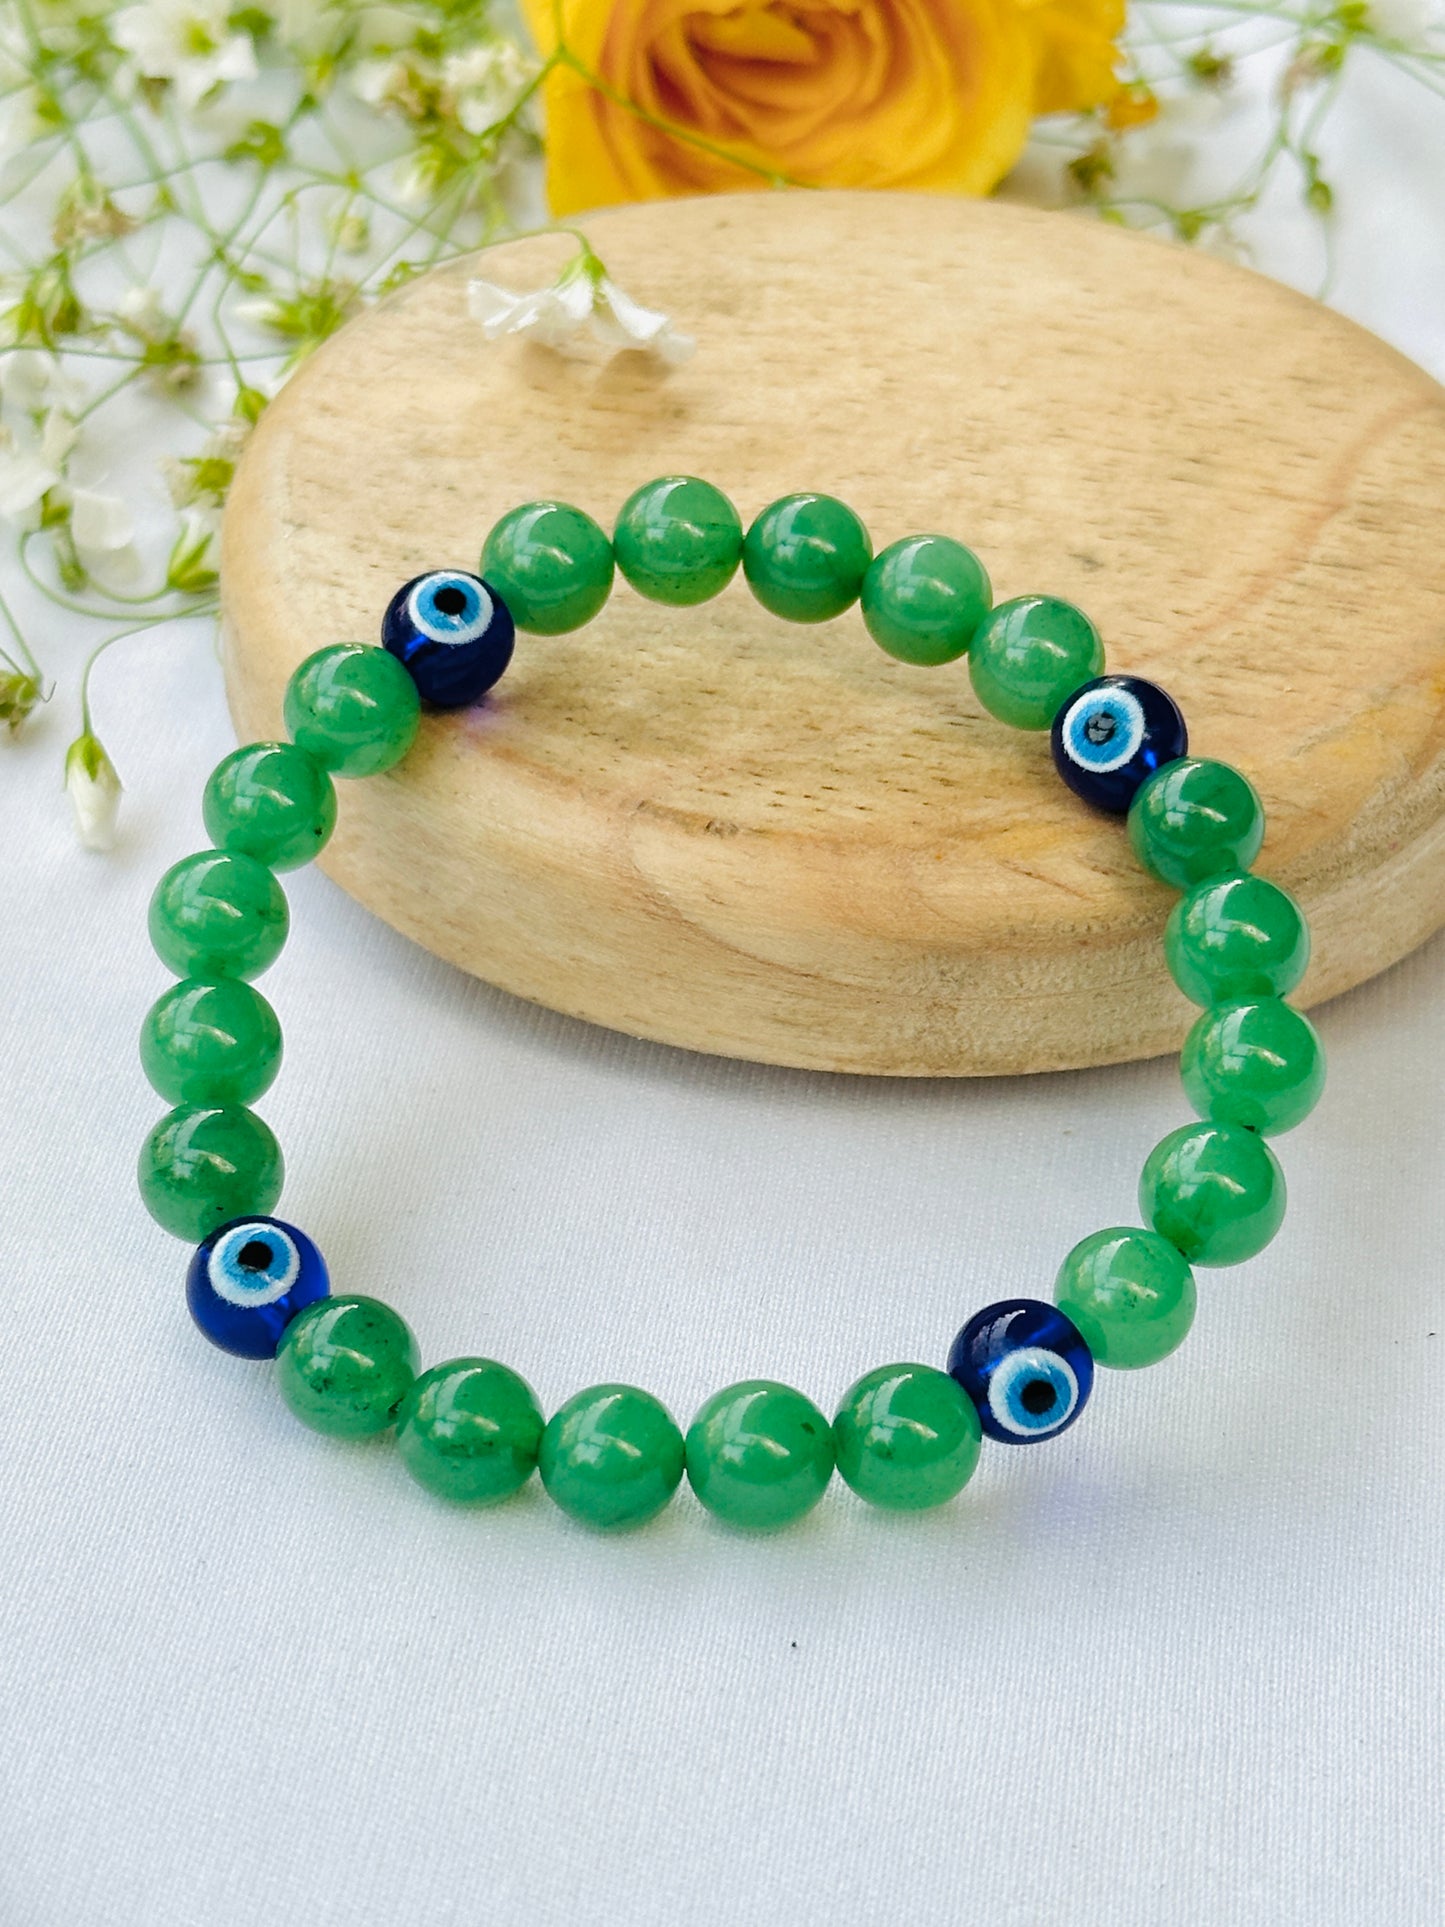 Wealth Attract and Evil Eye Protect Bracelet (Green Aventurine with Evil Eye) - Abhimantrit & Certified